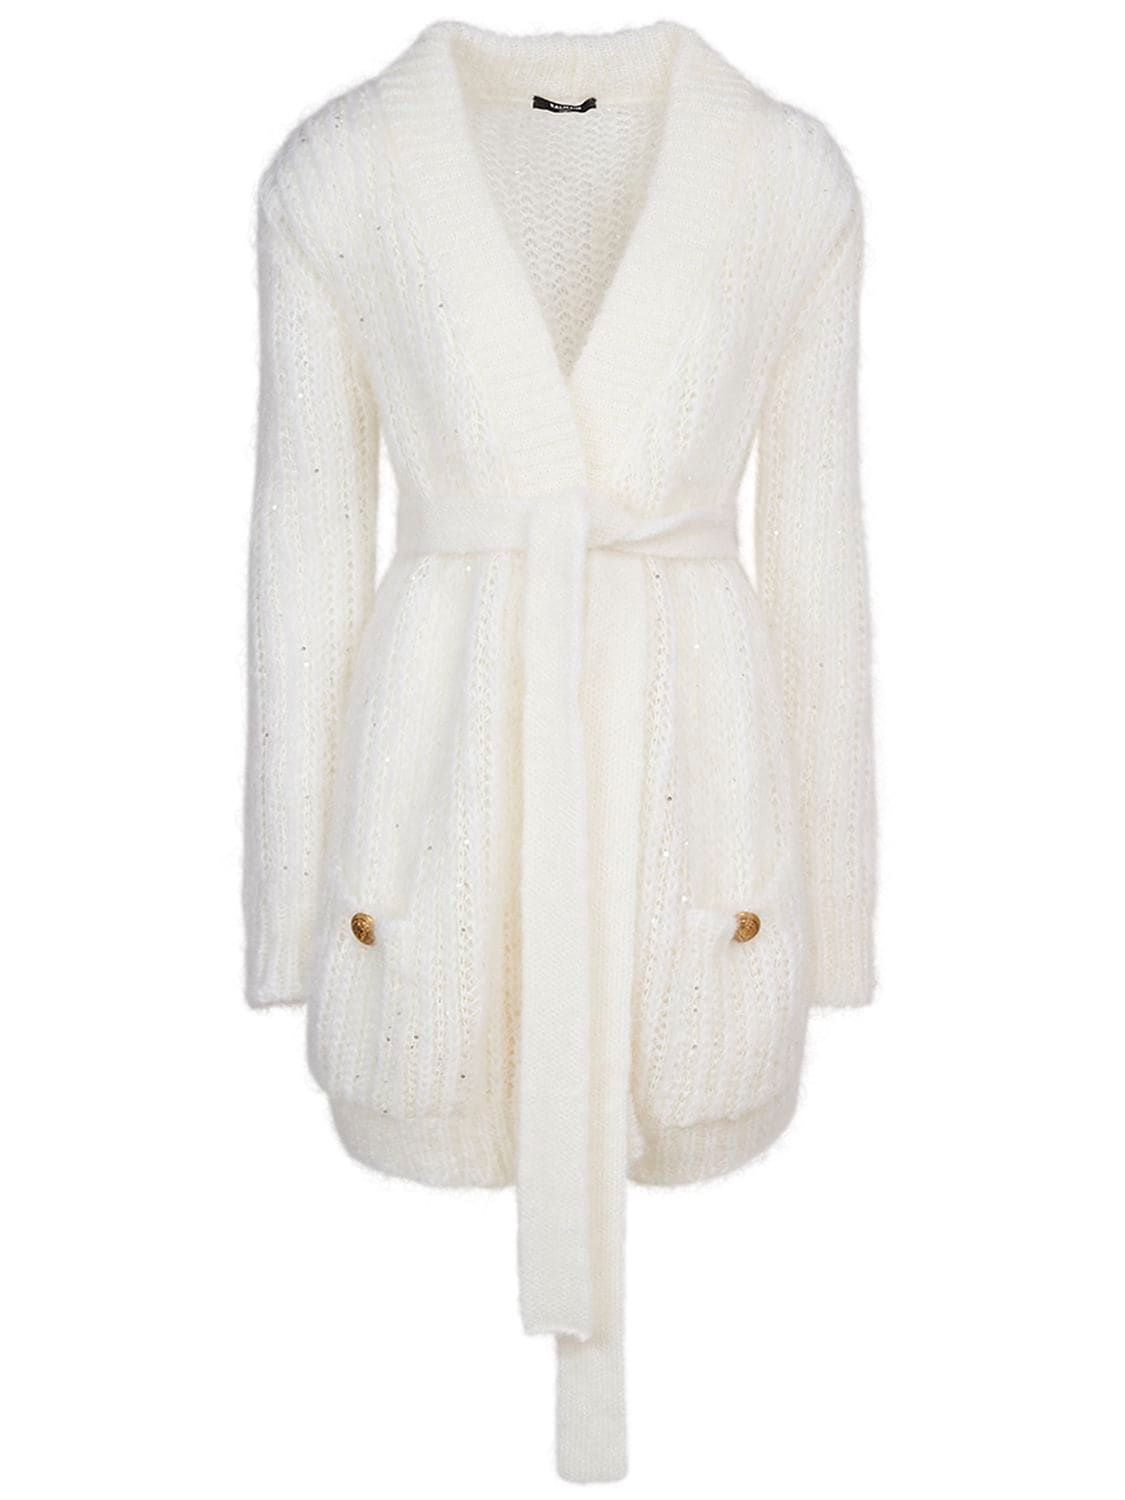 BALMAIN SEQUINED MOHAIR BELTED CARDIGAN